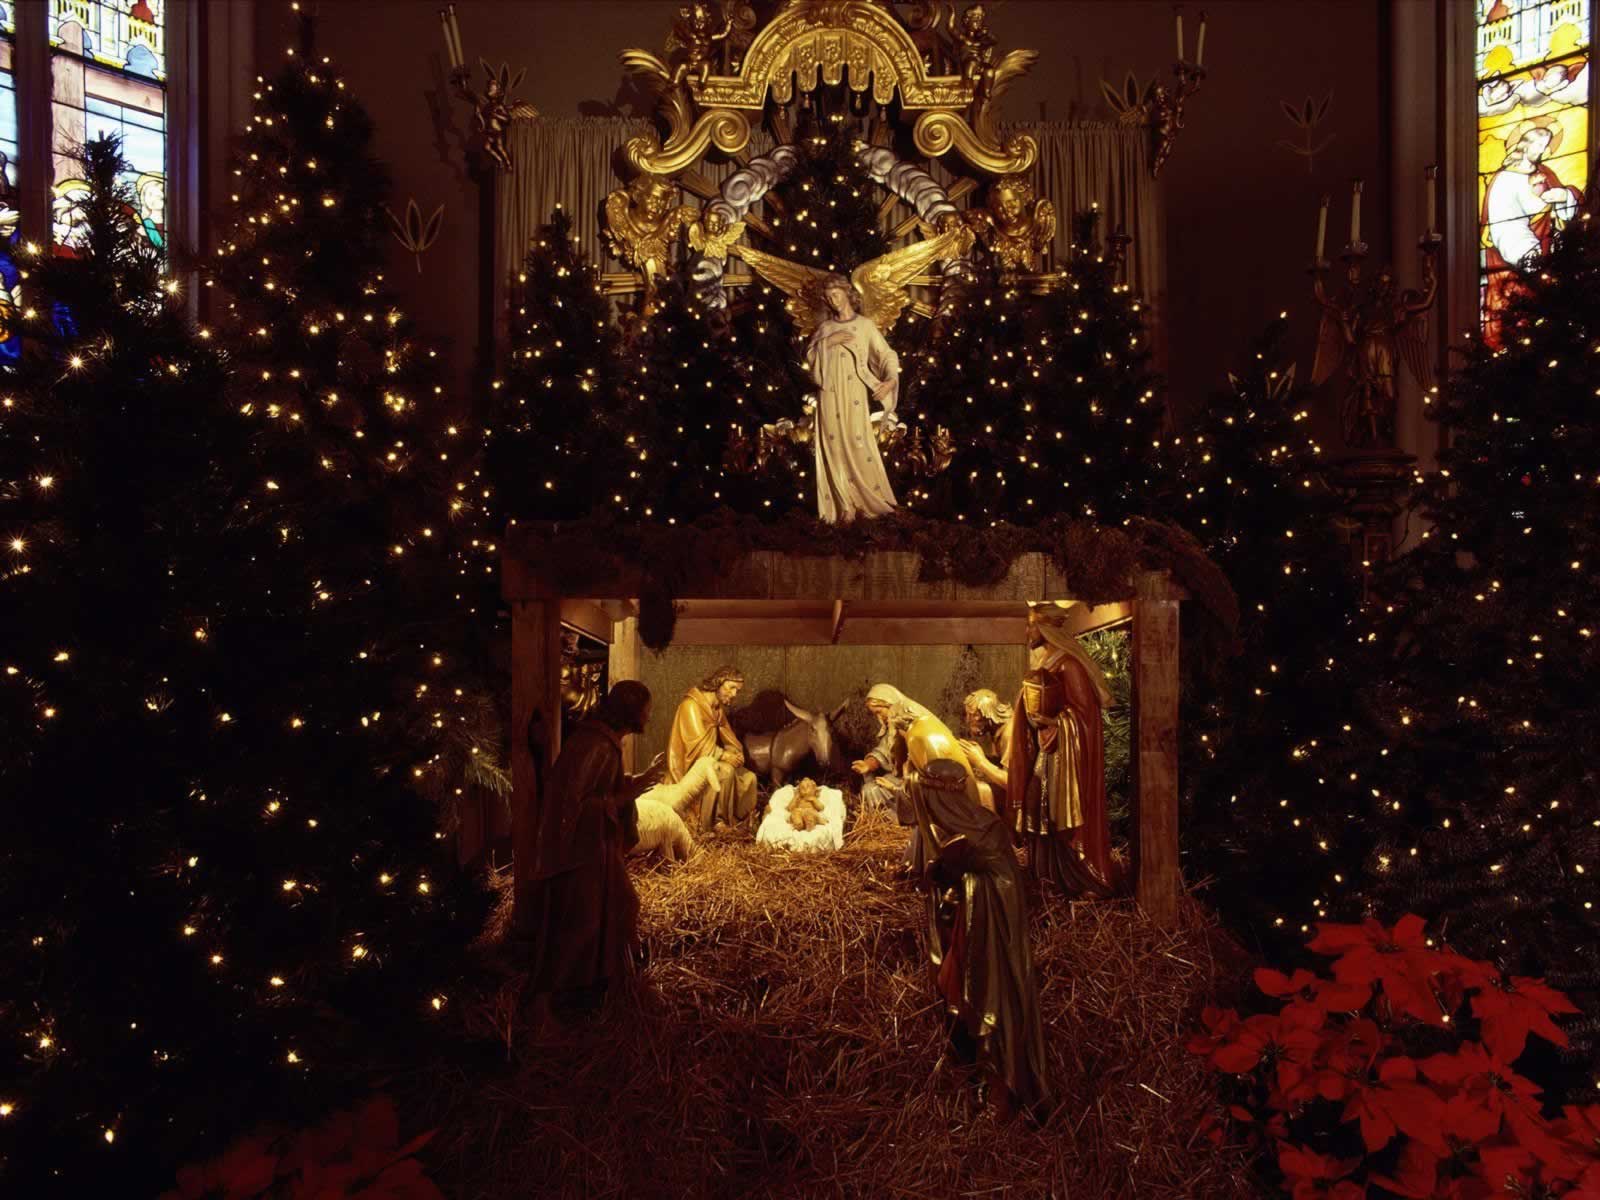 Wallpaper Gallery featuring Christmas Nativity